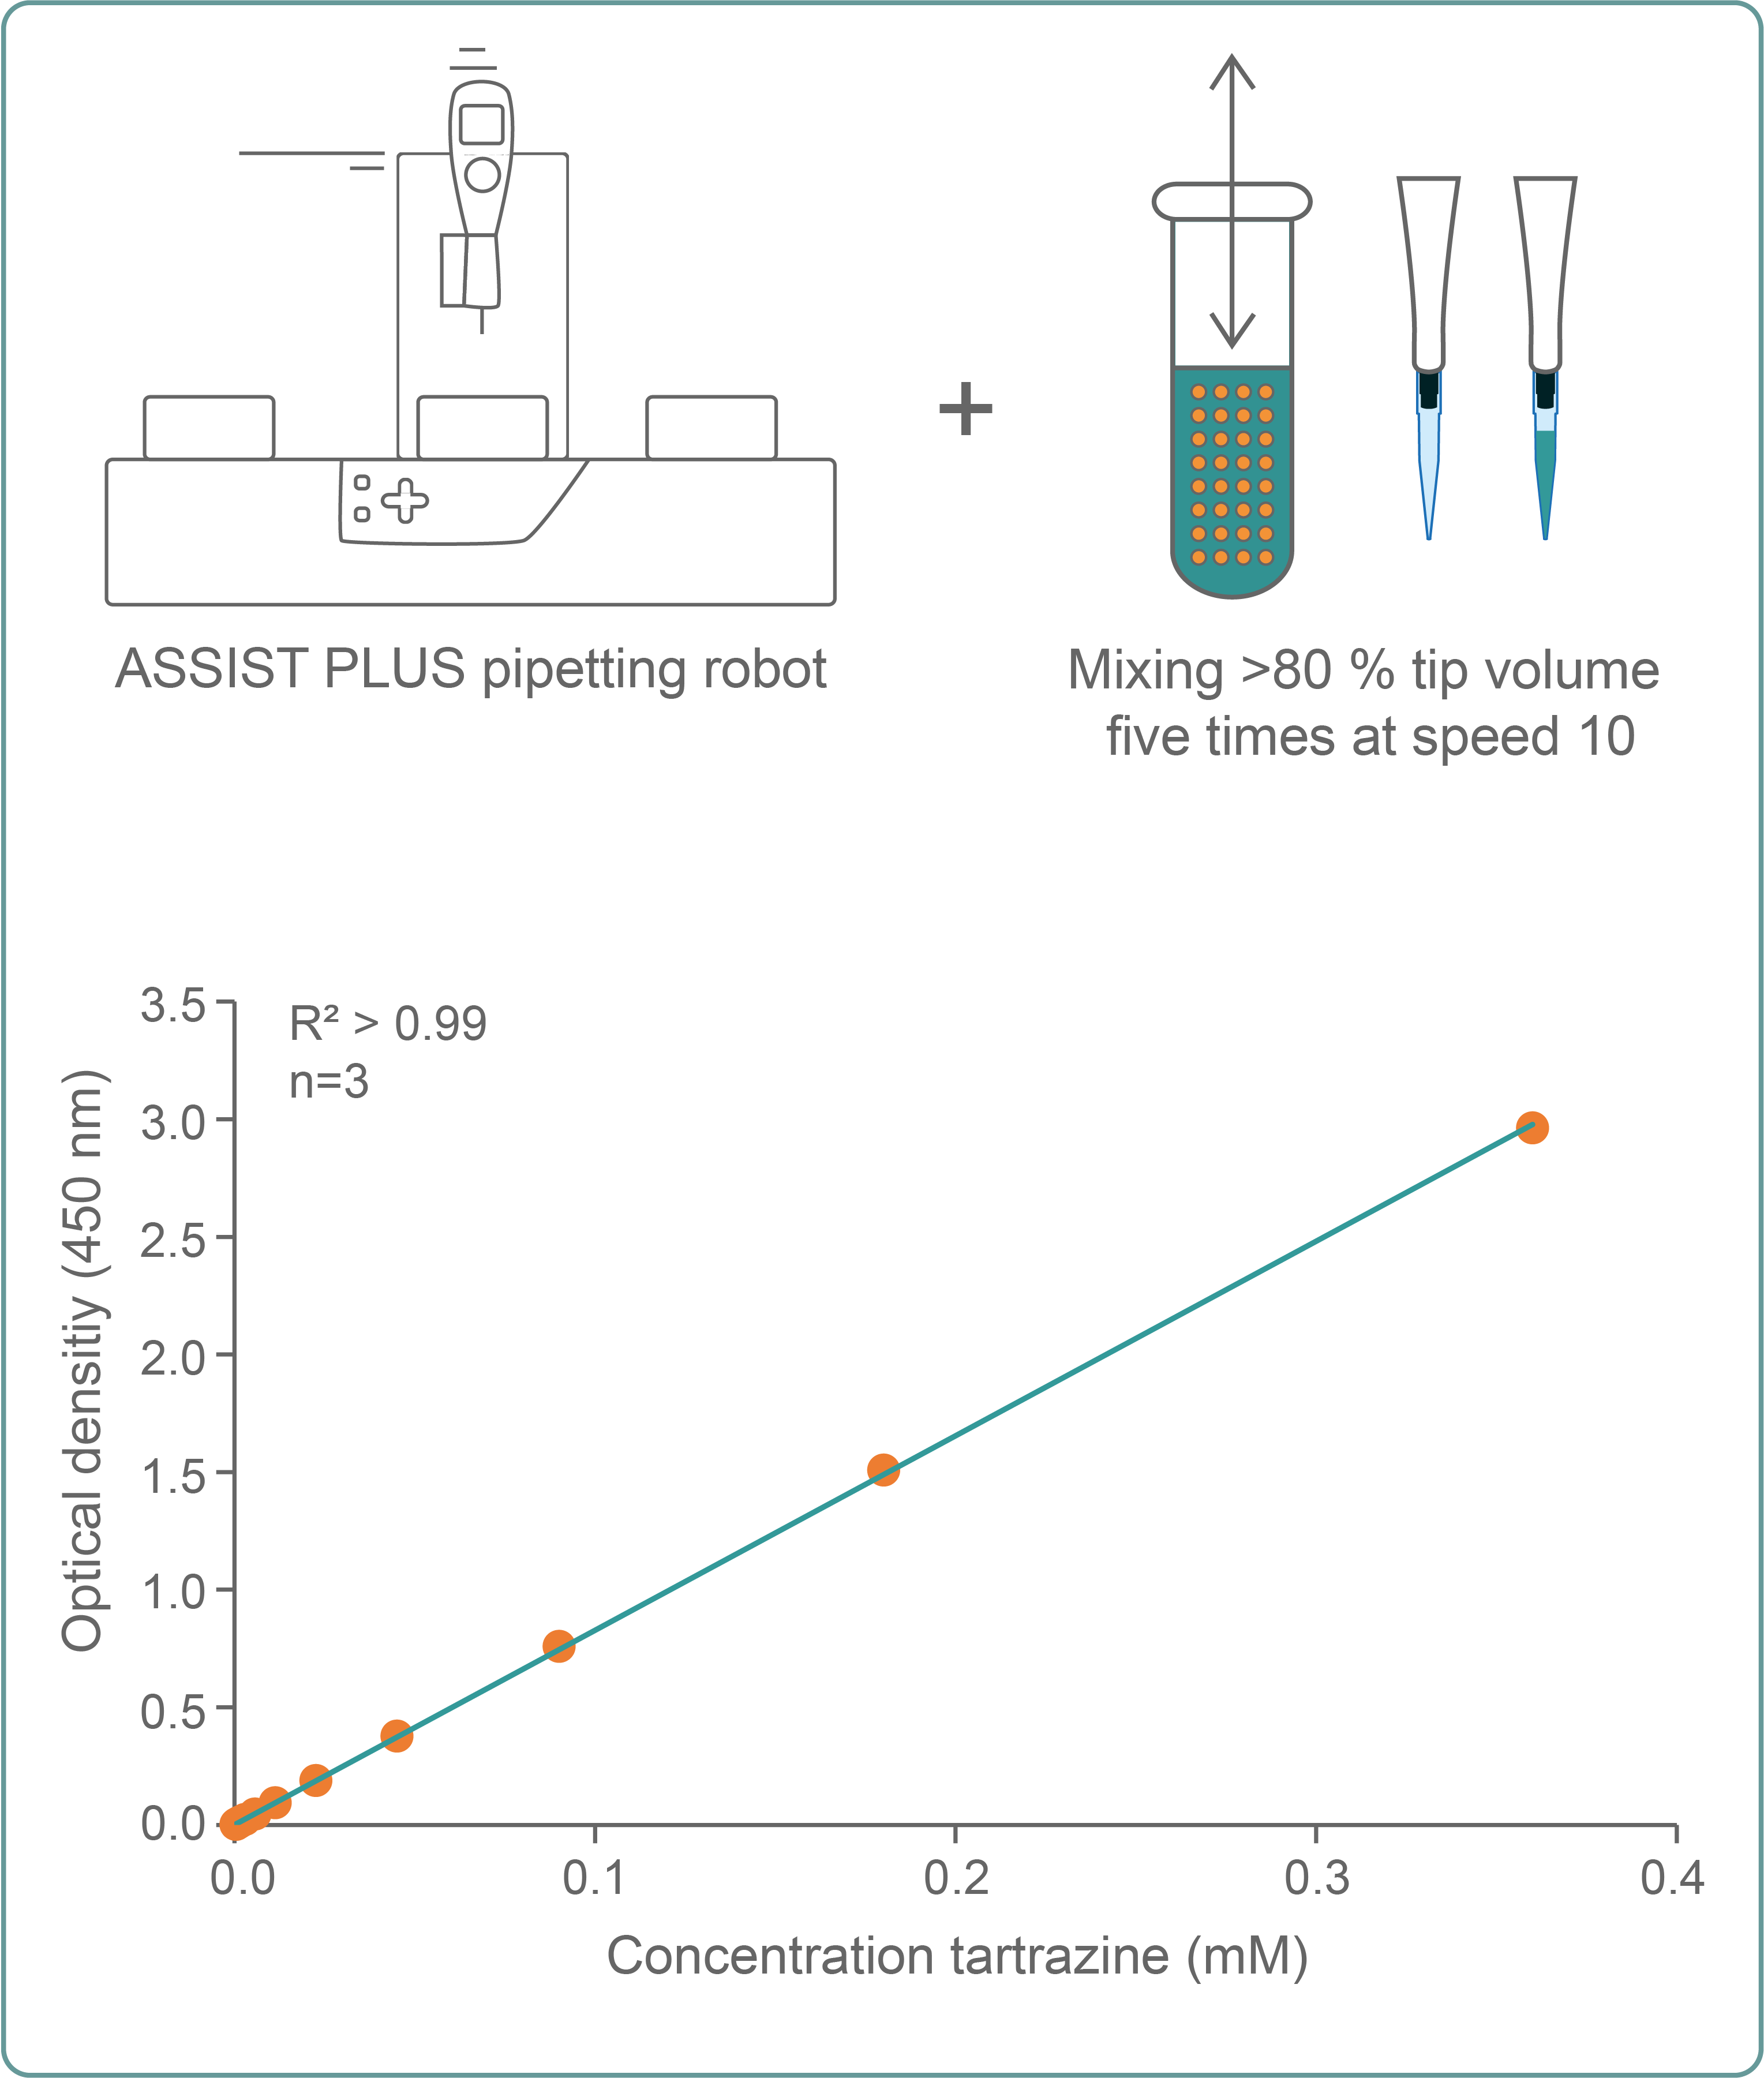 Illustration of a tartrazine 2-fold serial dilution performed with optimal settings on the ASSIST PLUS pipetting robot. A linear regression plot shows the calibration curve of three independent runs.